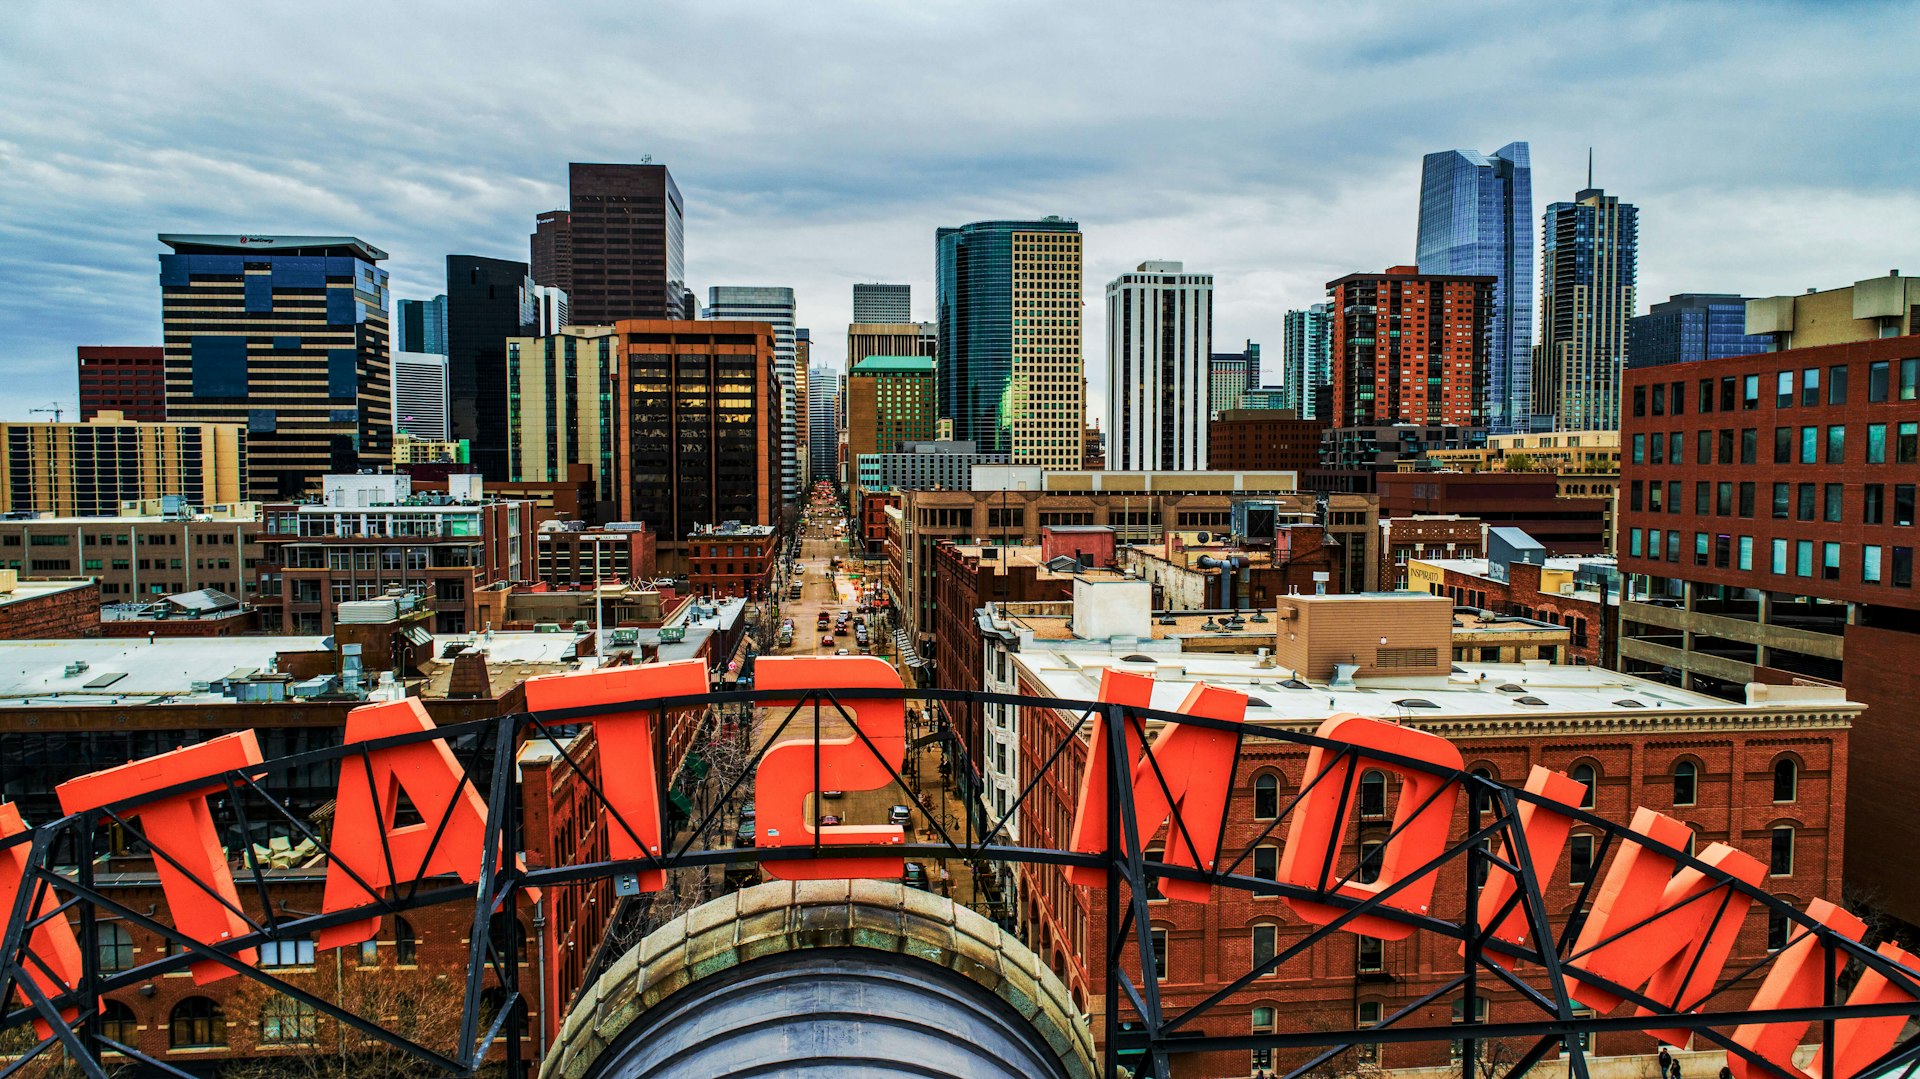 View of downtown Denver from the top of Union Station